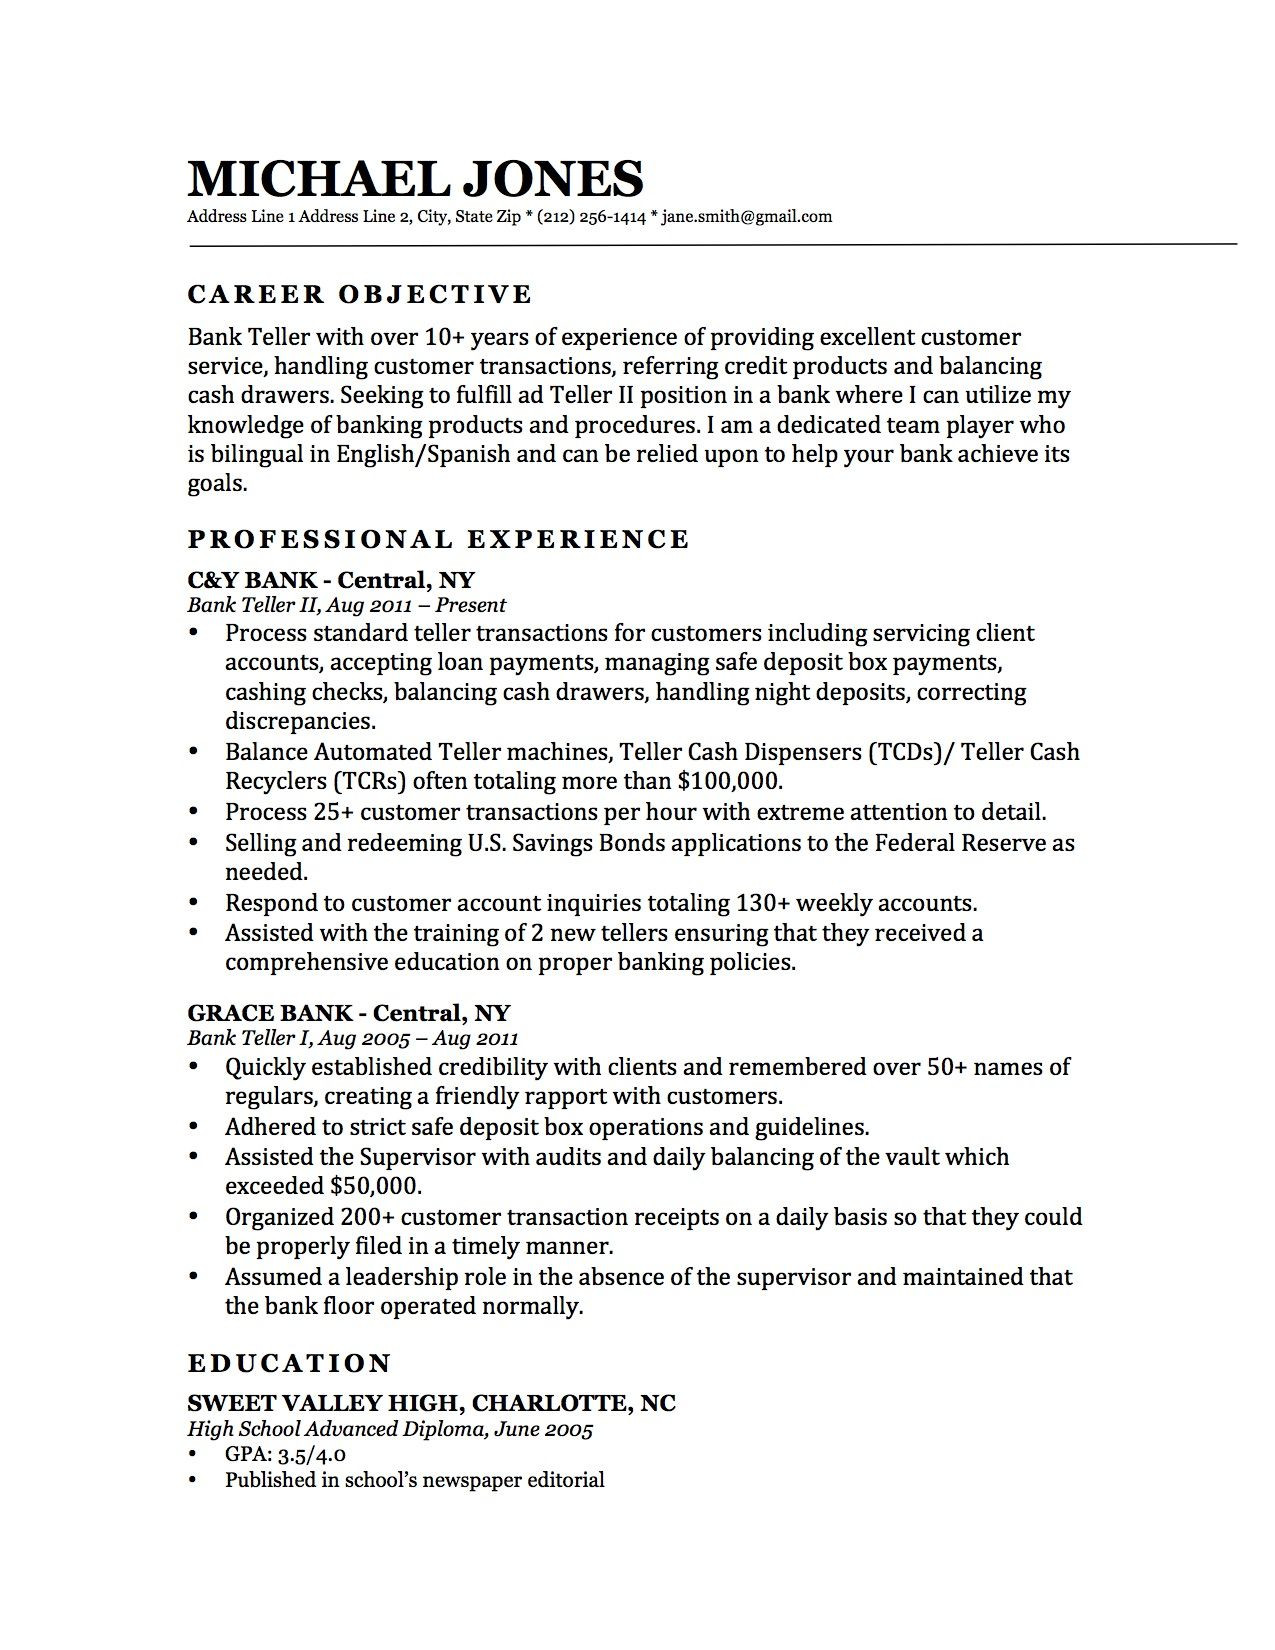 Bank Teller Resume Templates No Experience This is A Professionally Designed Bank Teller Resume. It …